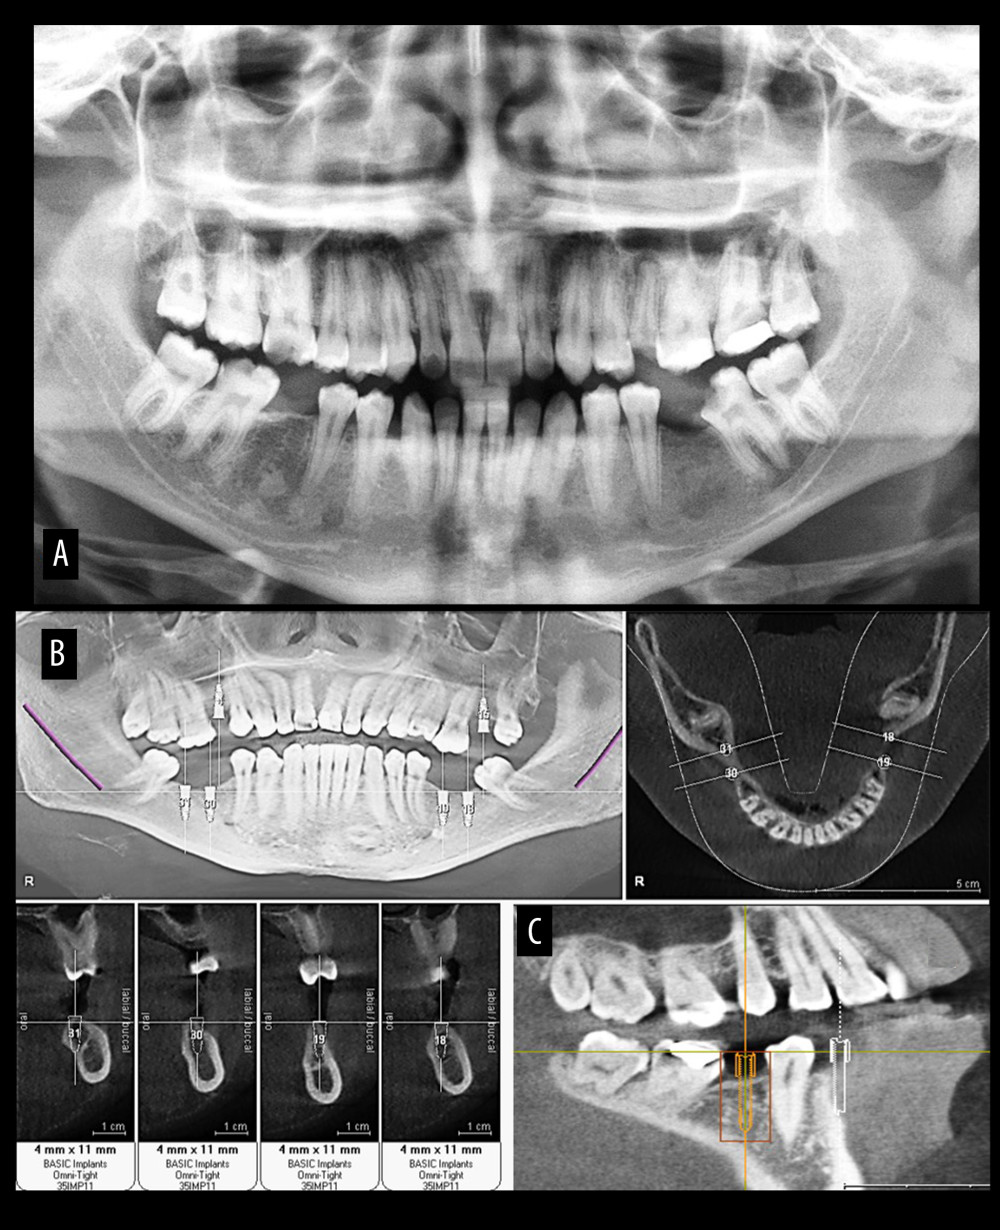 Diagnostic evaluation for implant selection using conventional digital orthopantomograph (A) and cone beam computed tomography (CBCT) (B) and (C). Figure created using MS PowerPoint, version 20H2 (OS build 19042,1466), Windows 11 Pro, Microsoft corporation).